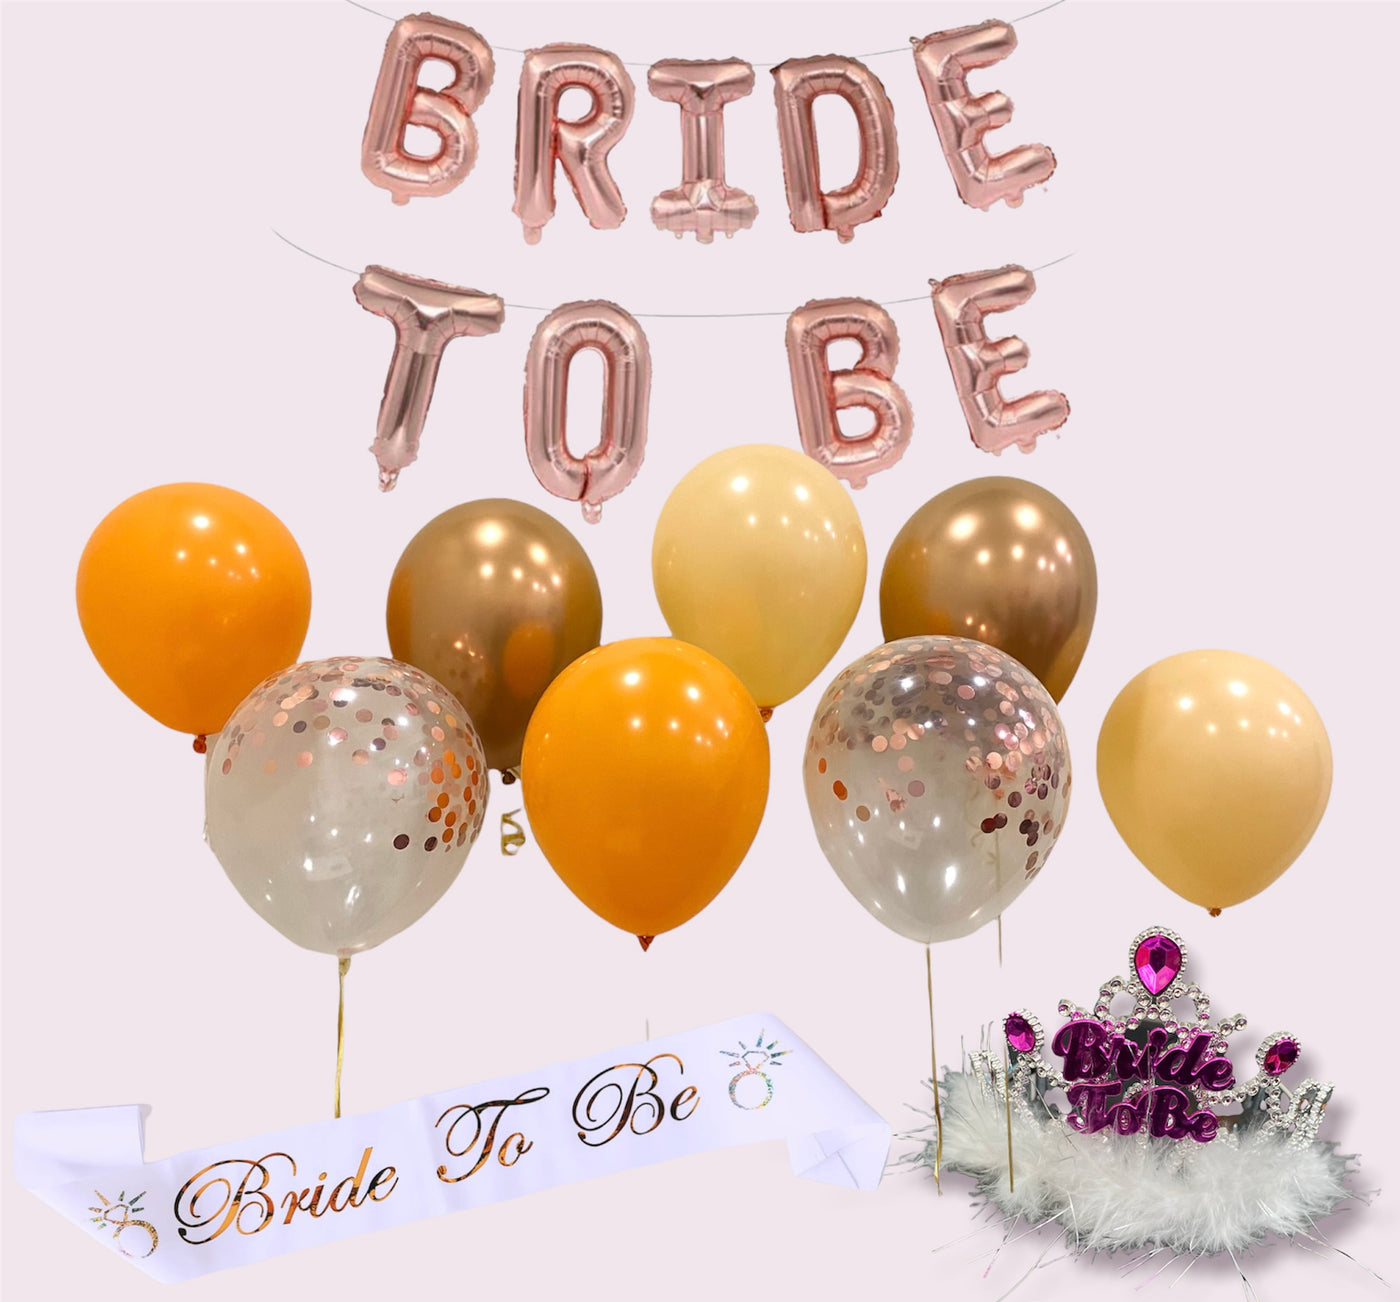 Bride to Be Set